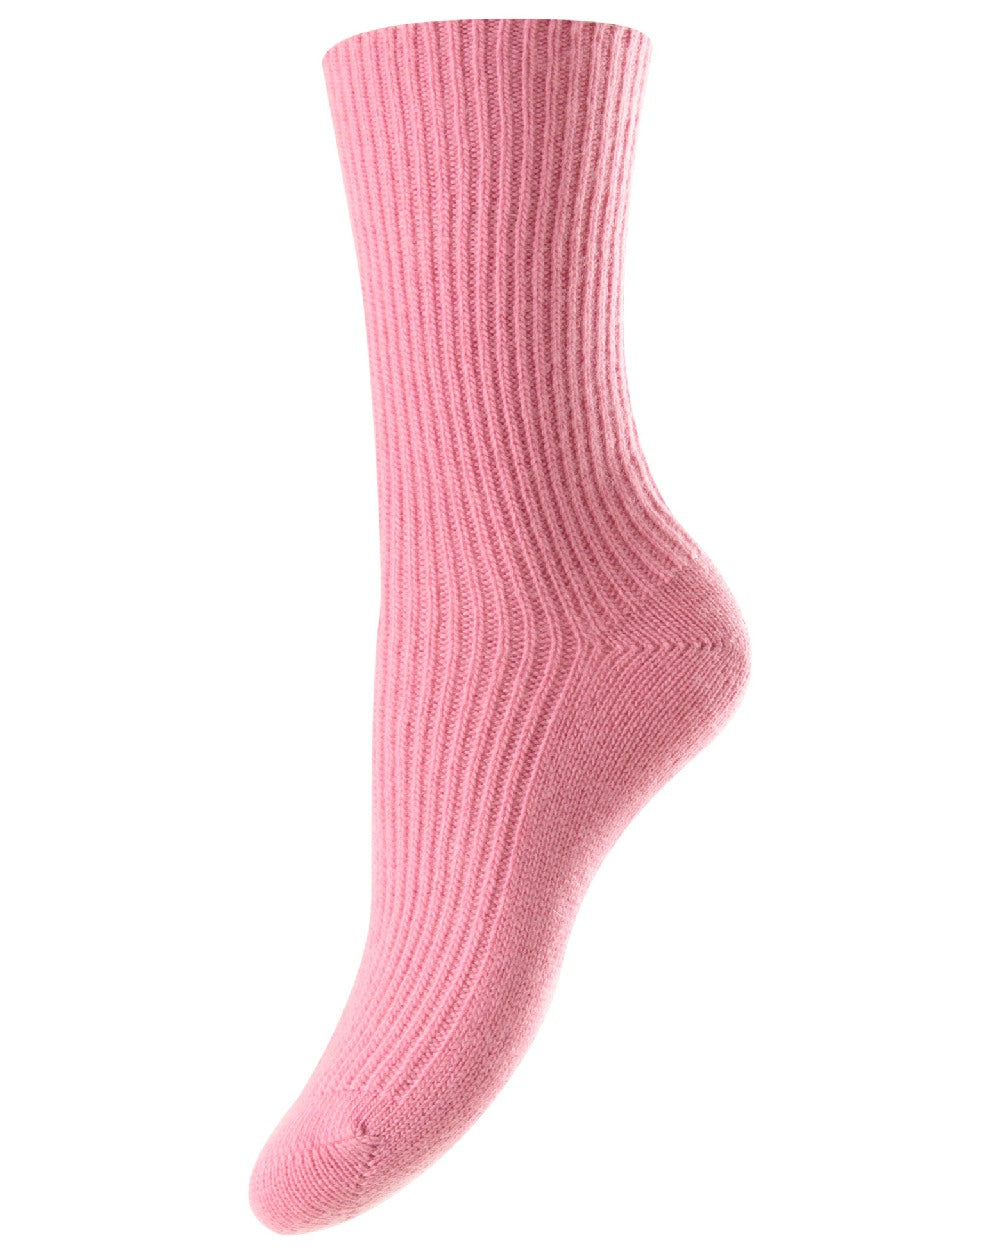 HJ Hall Cashmere Blend Turn Over Top Socks in Candy Pink 